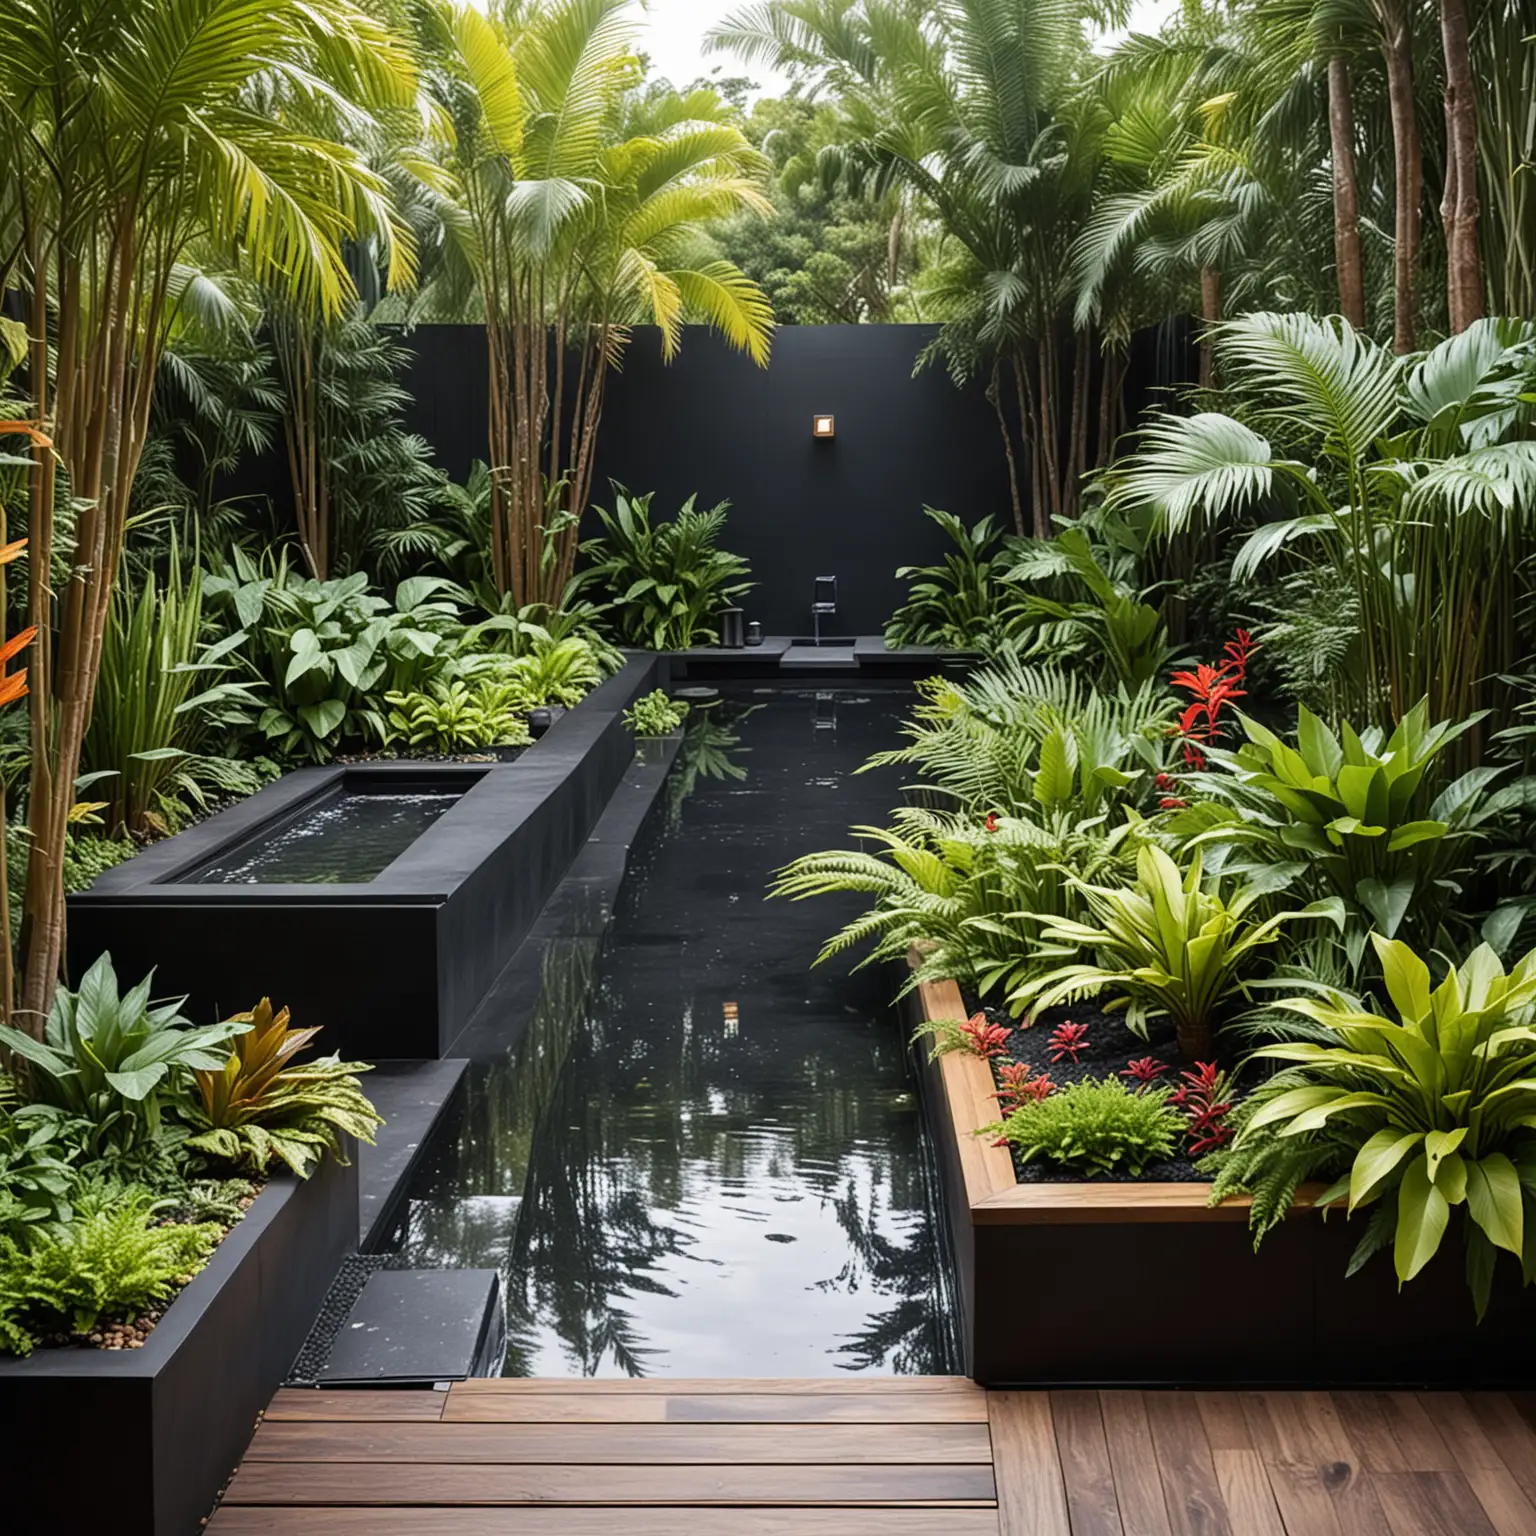 Modern-Tropical-Garden-with-Wooden-Deck-and-Water-Feature